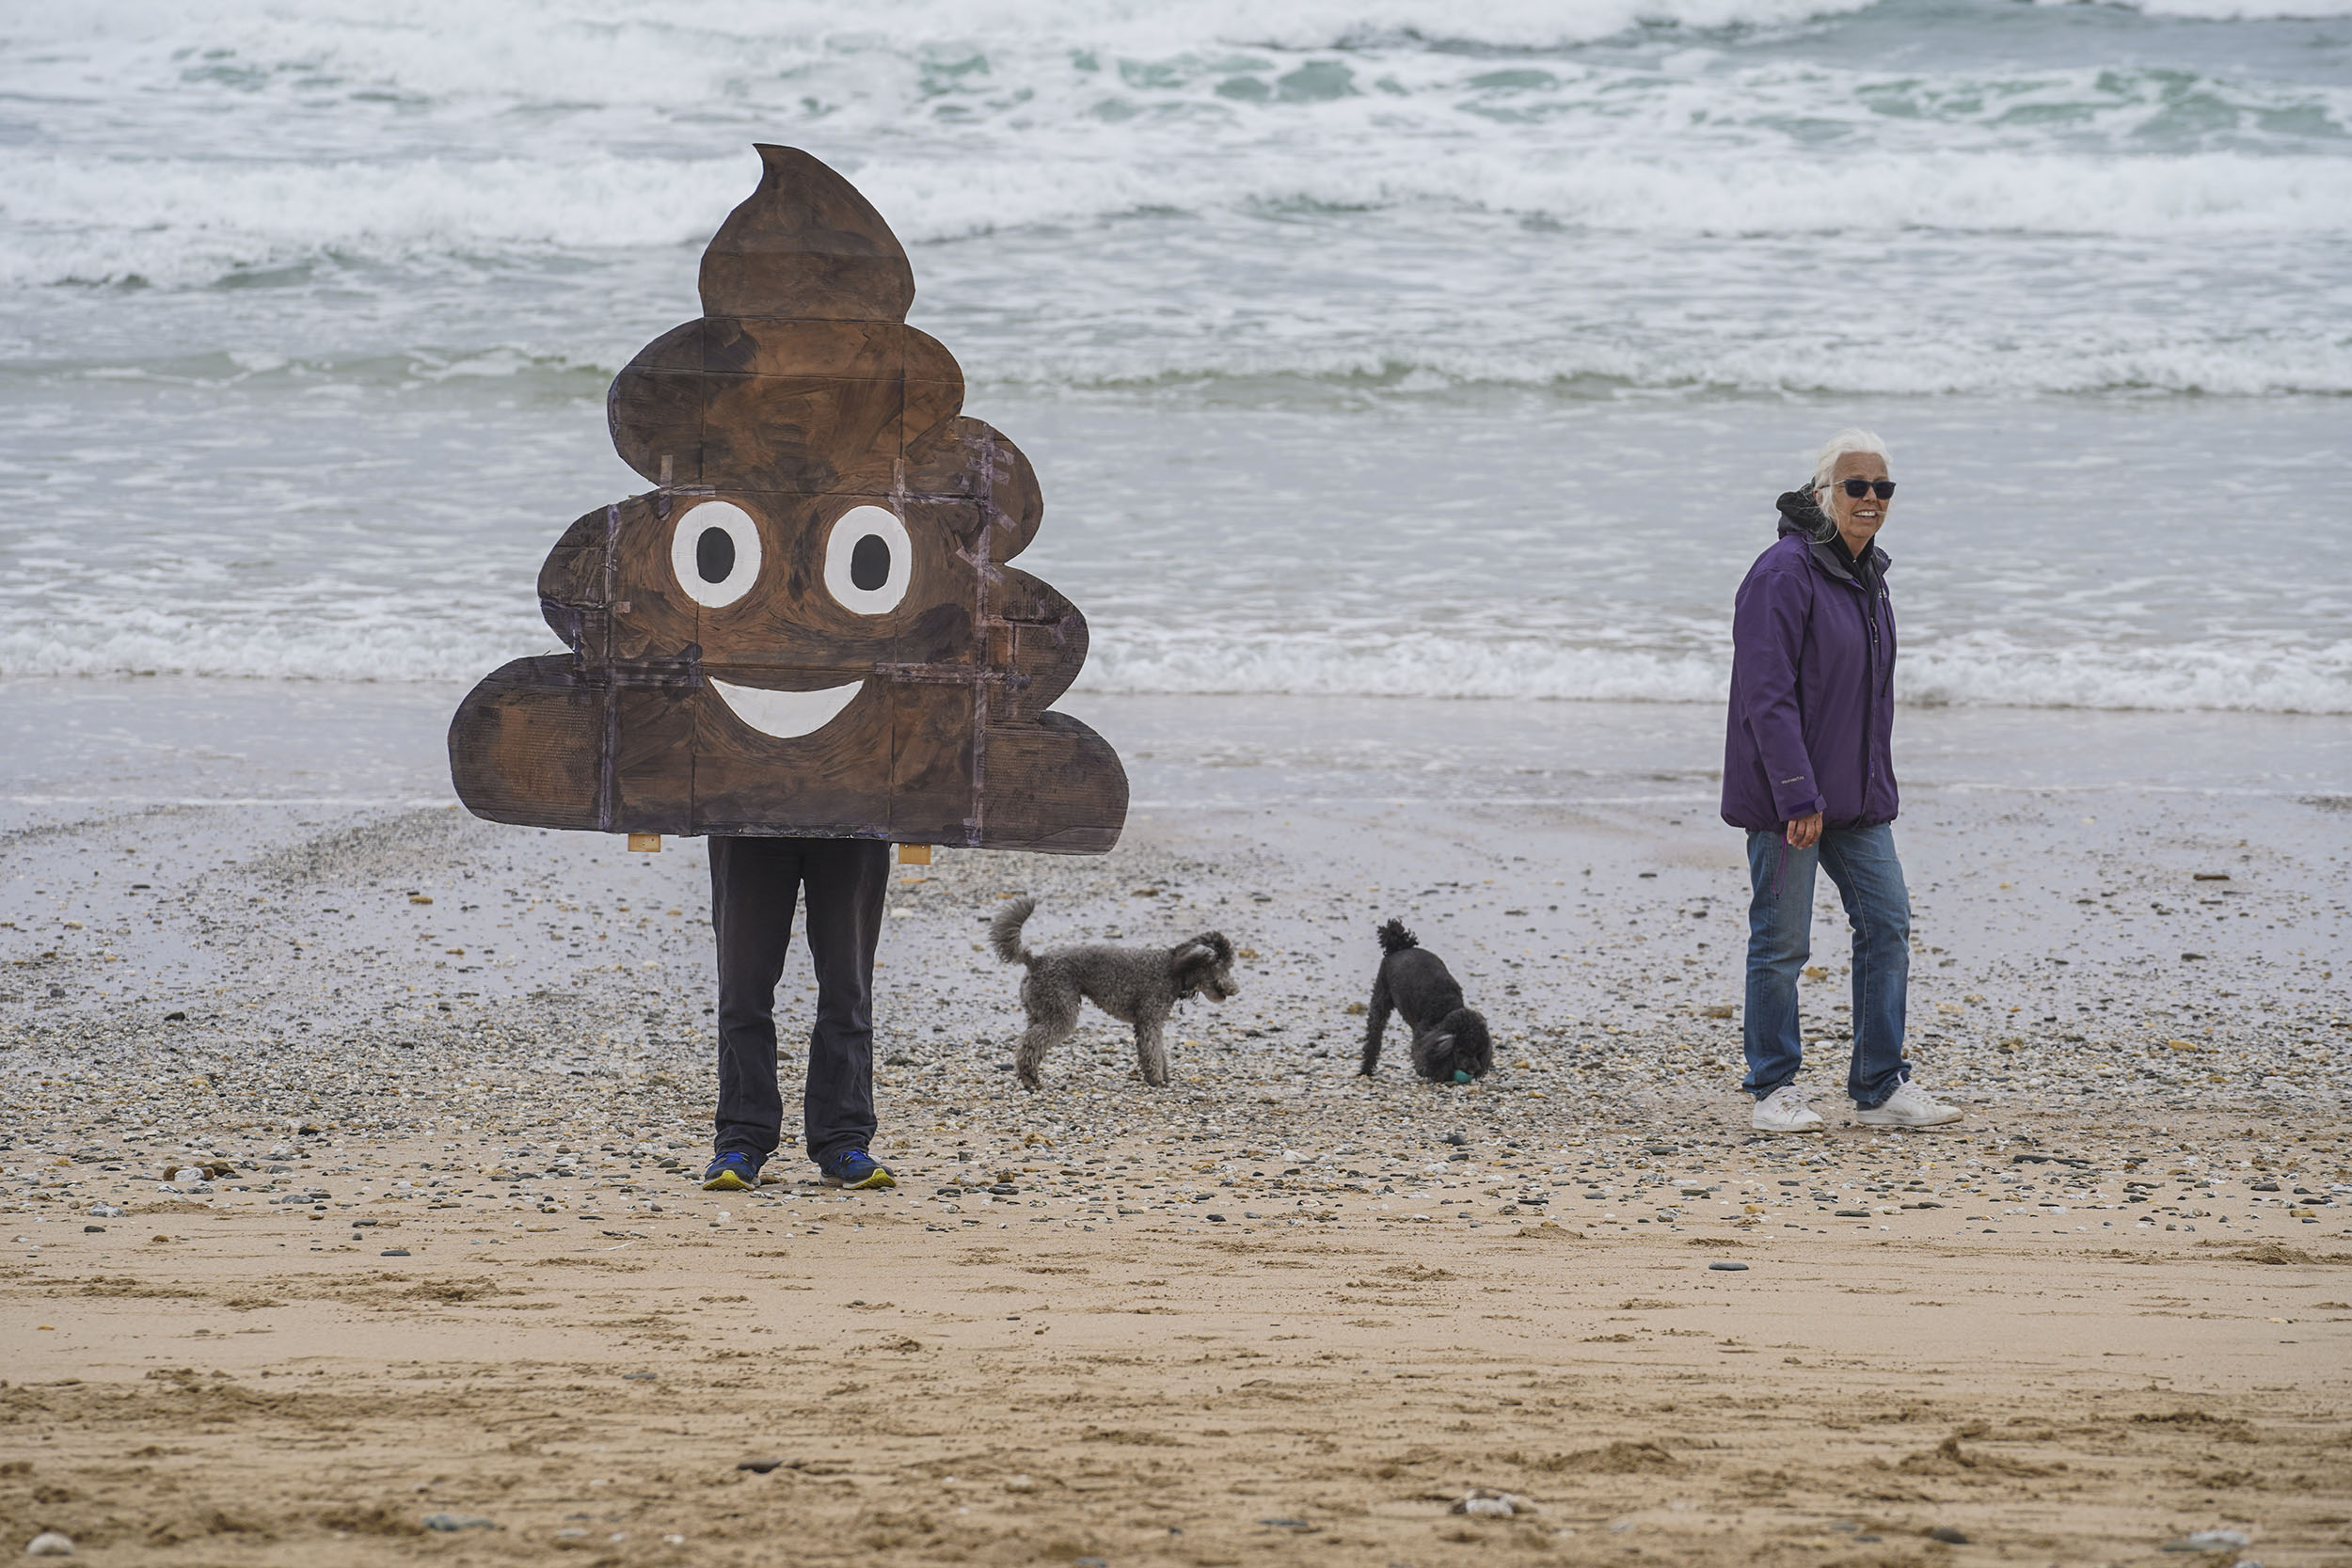 Protester in a 'happy poo' emoji costume stands on a beach. Two dogs and their owner are walking by.